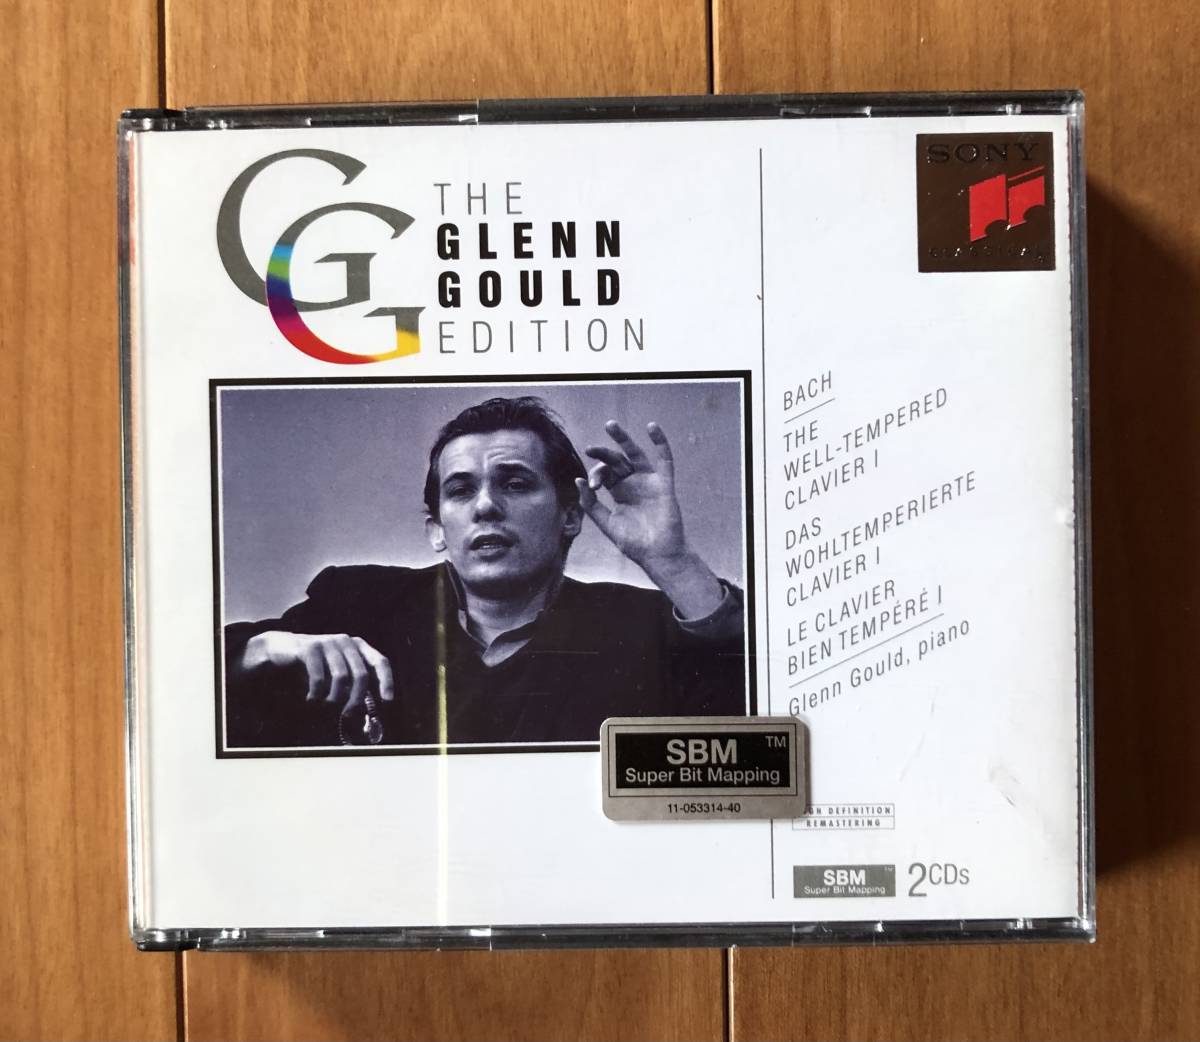 2CD-Sep / The Glenn Gould Edition / BACH_The Well-Tempered Clavier 1, Das Wohltemperierte, Le Clavier Bien Tempere １ 